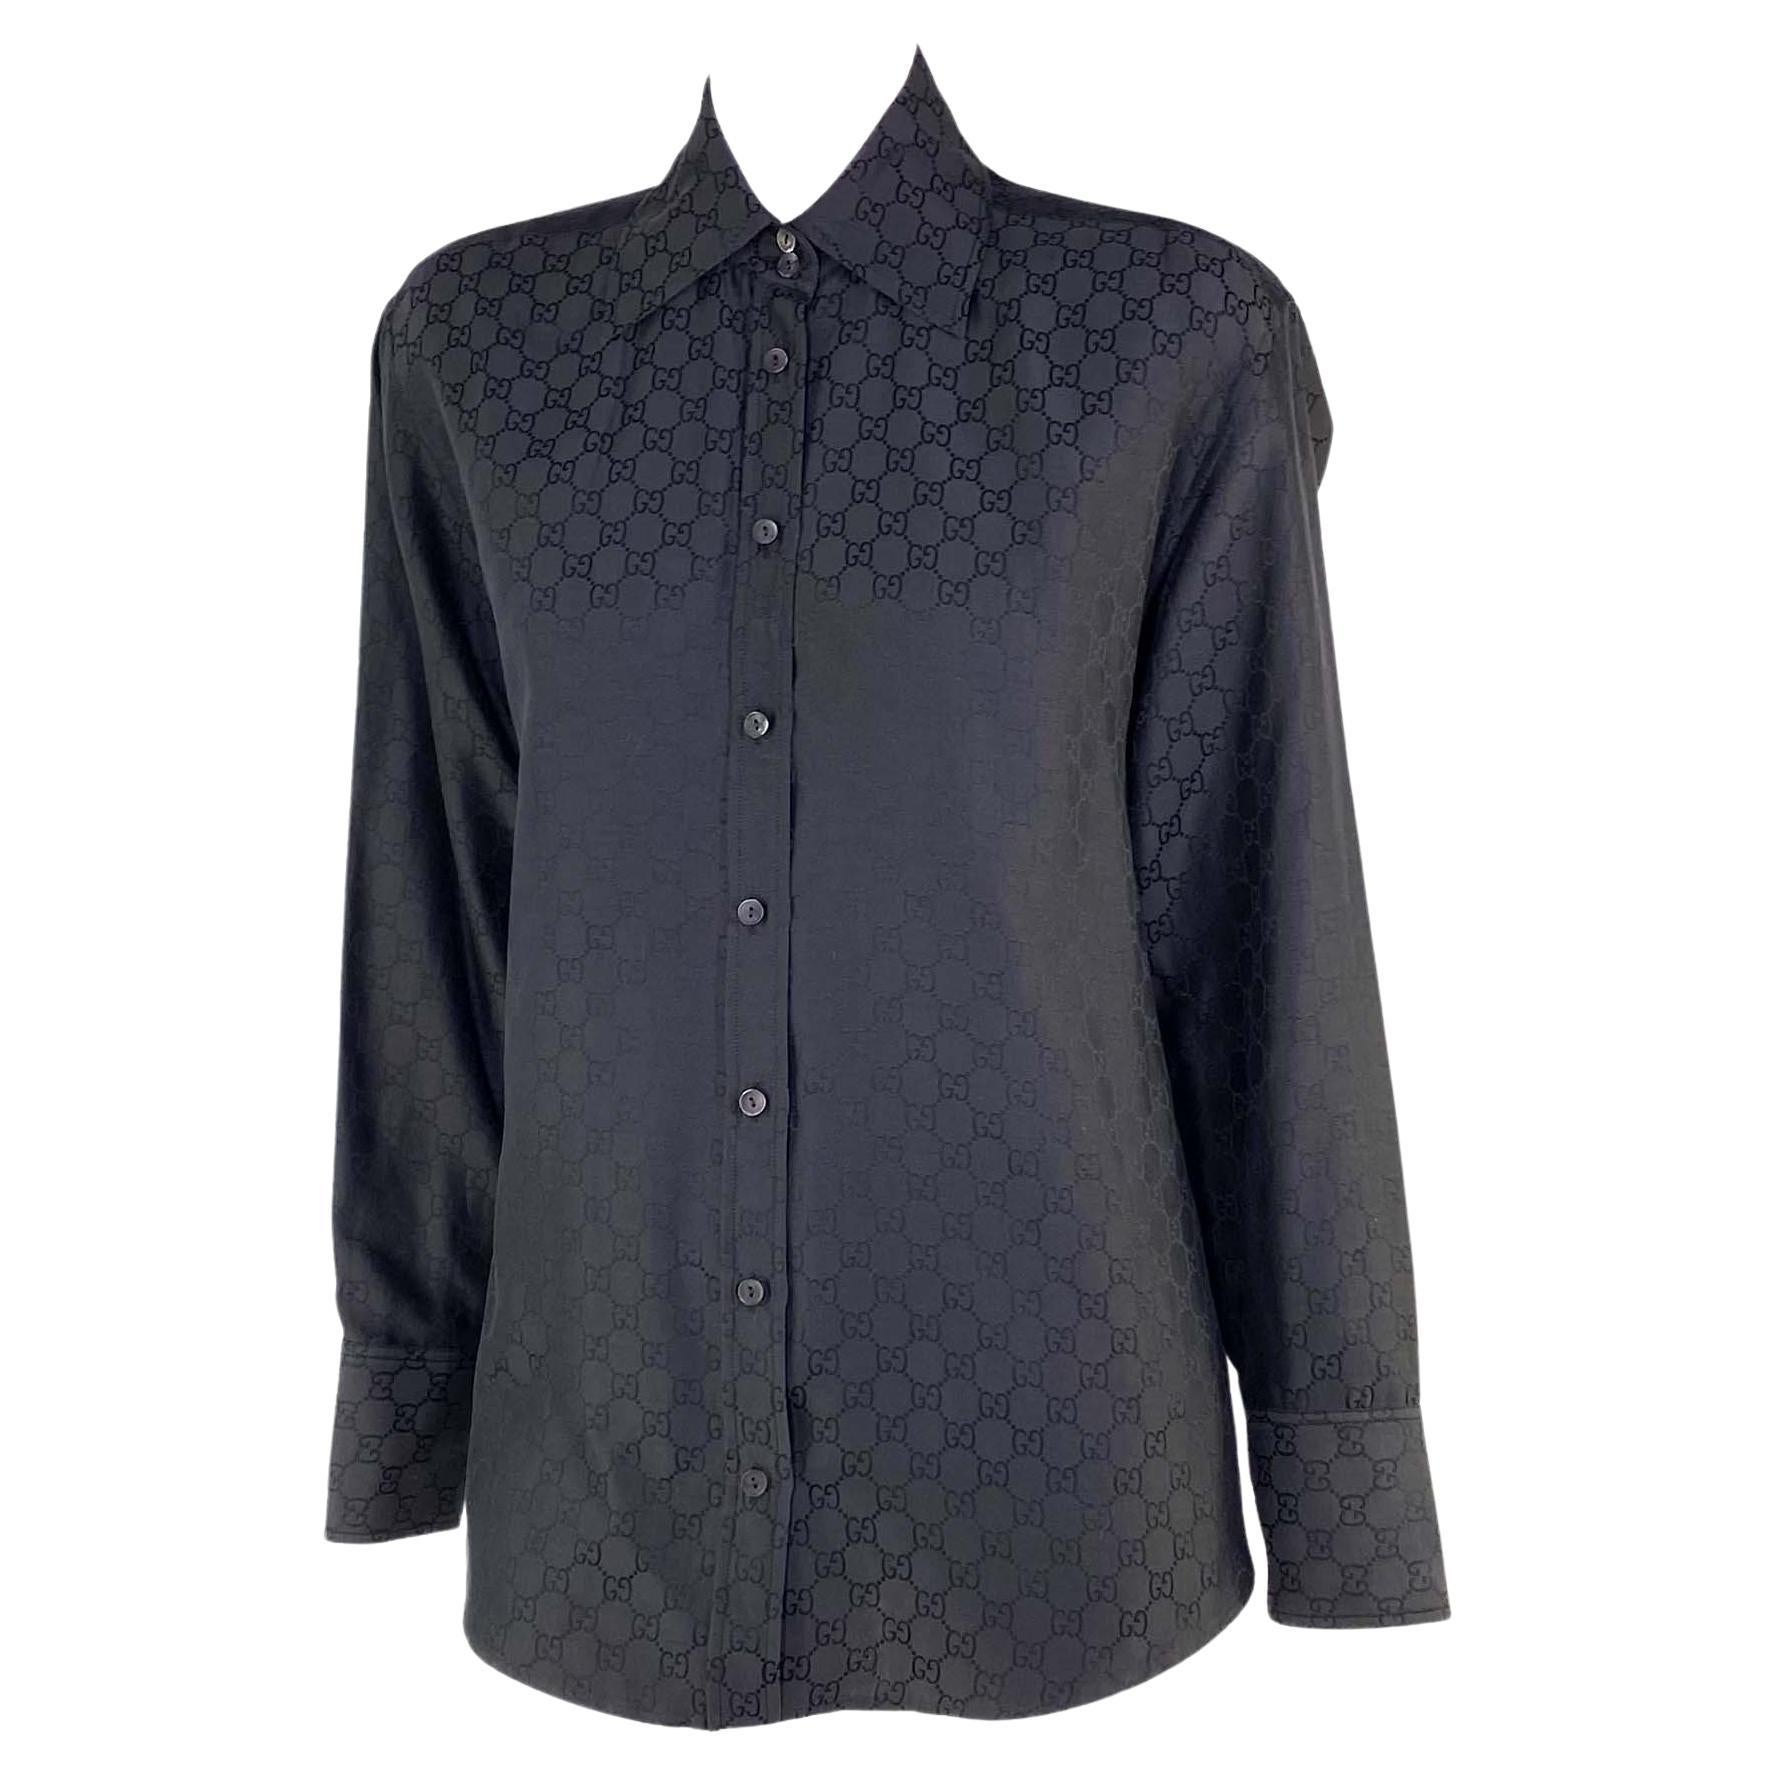 S/S 1998 Gucci by Tom Ford GG Monogram Black Cotton Silk Shoulder Pad Button Up For Sale